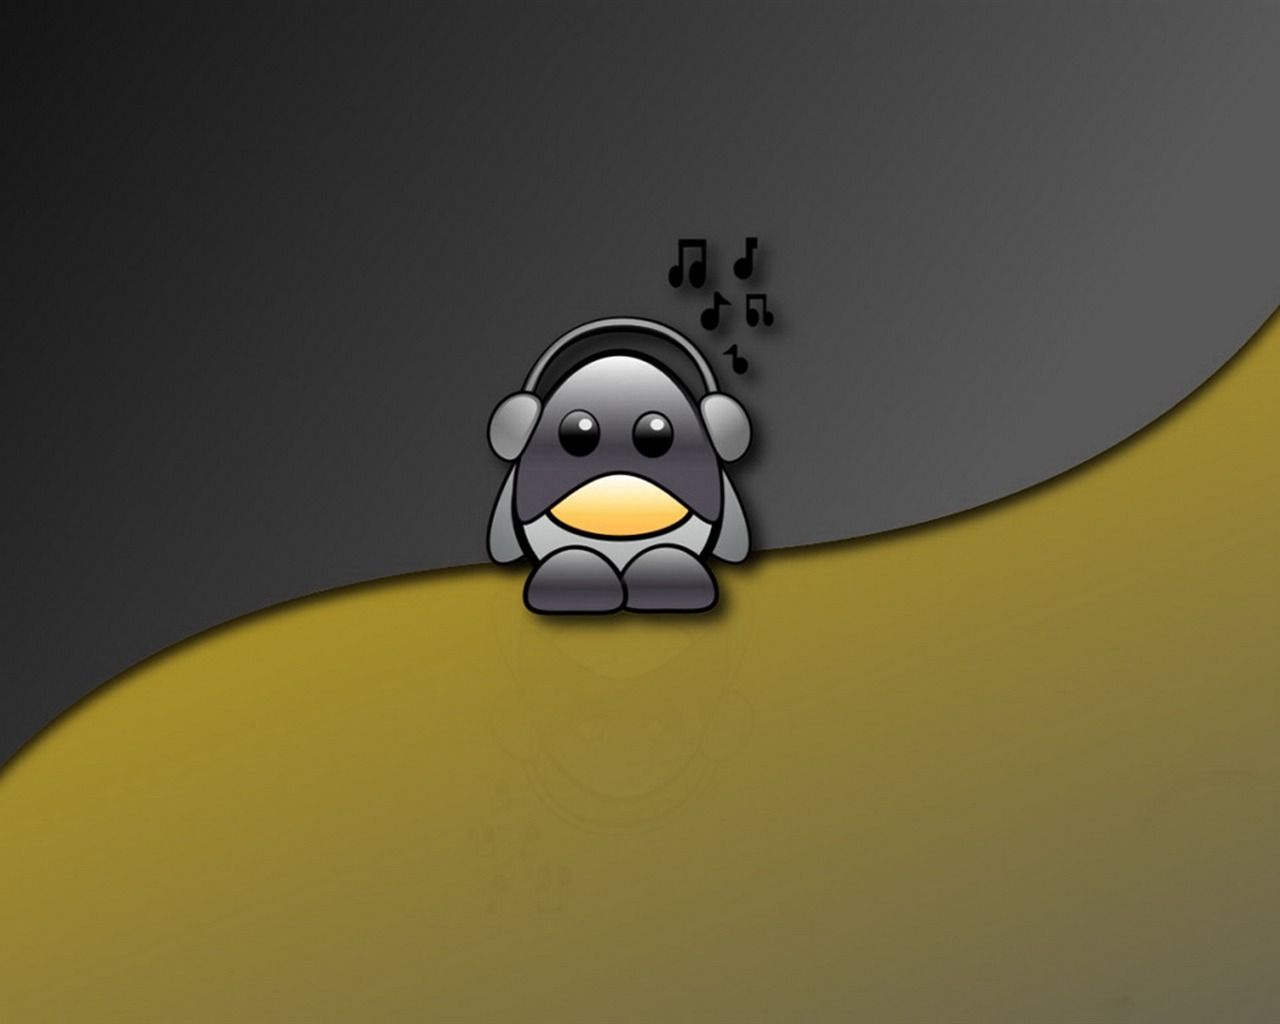 Linux tapety (2) #13 - 1280x1024